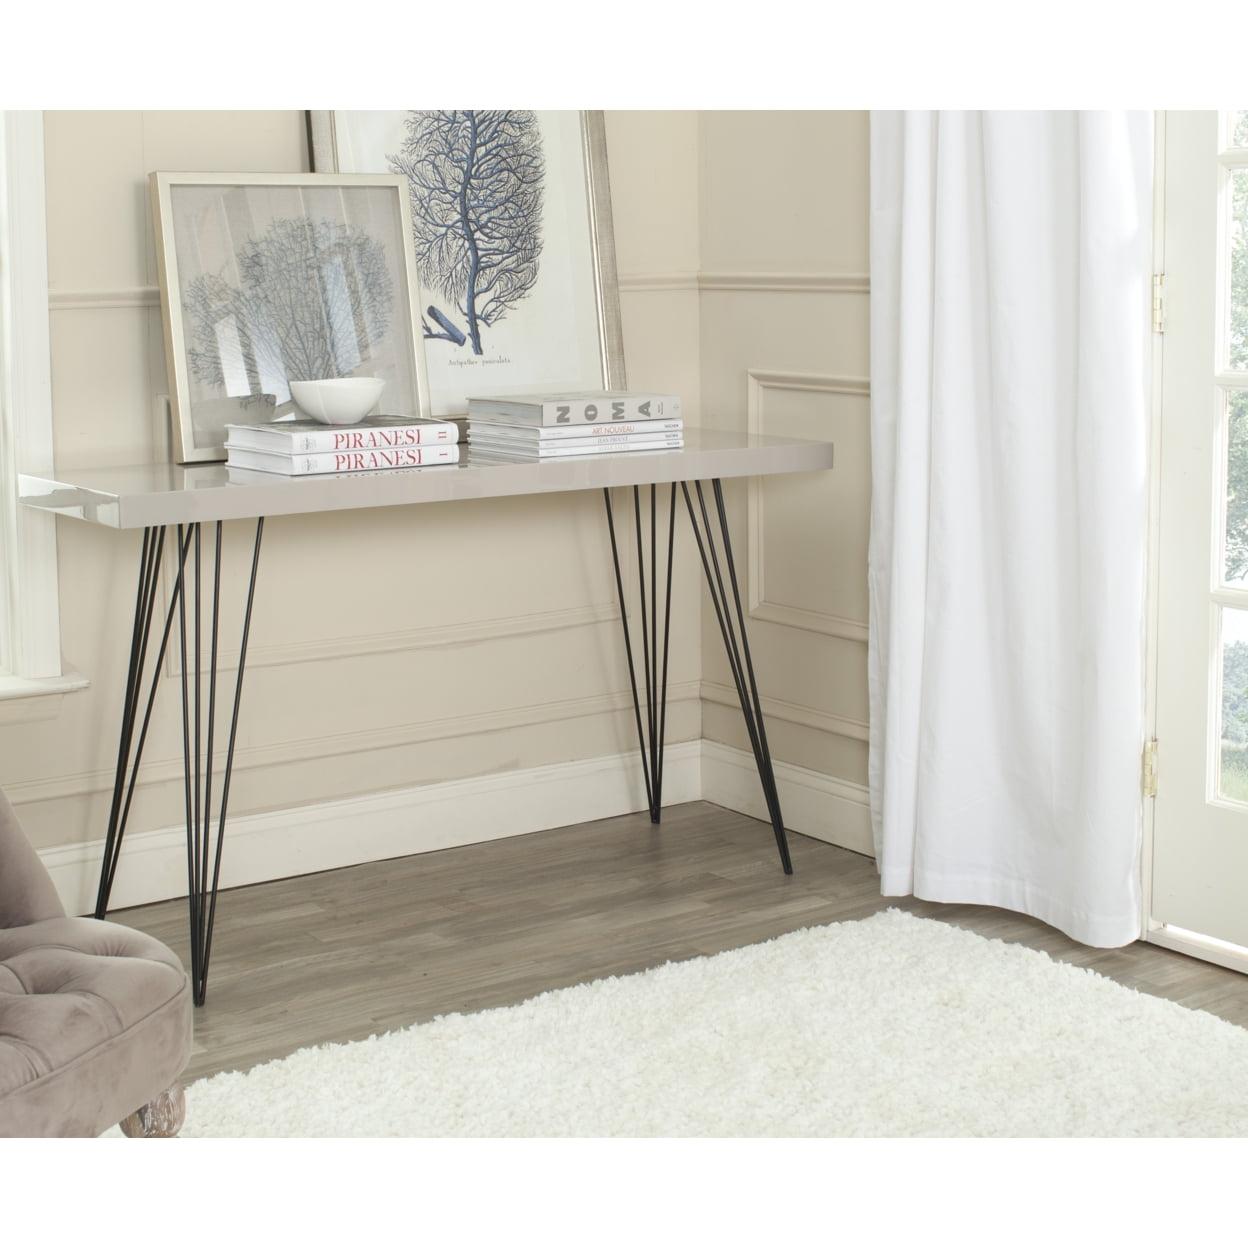 Transitional Taupe and Black Rectangular Console Table with Iron Legs